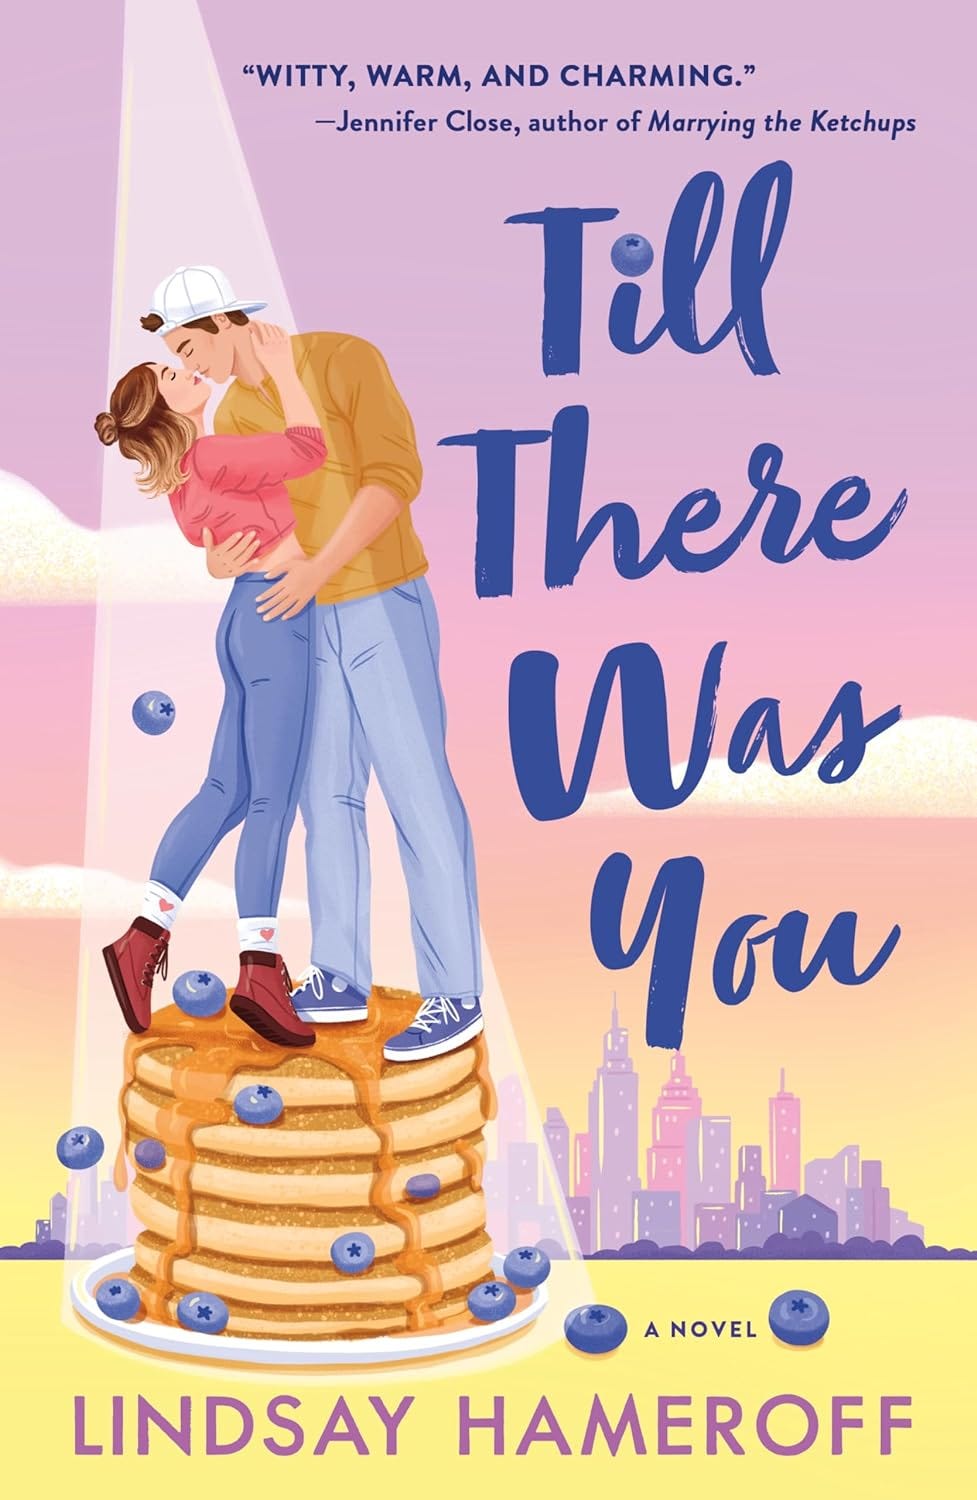 The cover of "Till There Was You" -- a purple and yellow ombre featuring a kissing couple standing on a stack of blueberry pancakes.